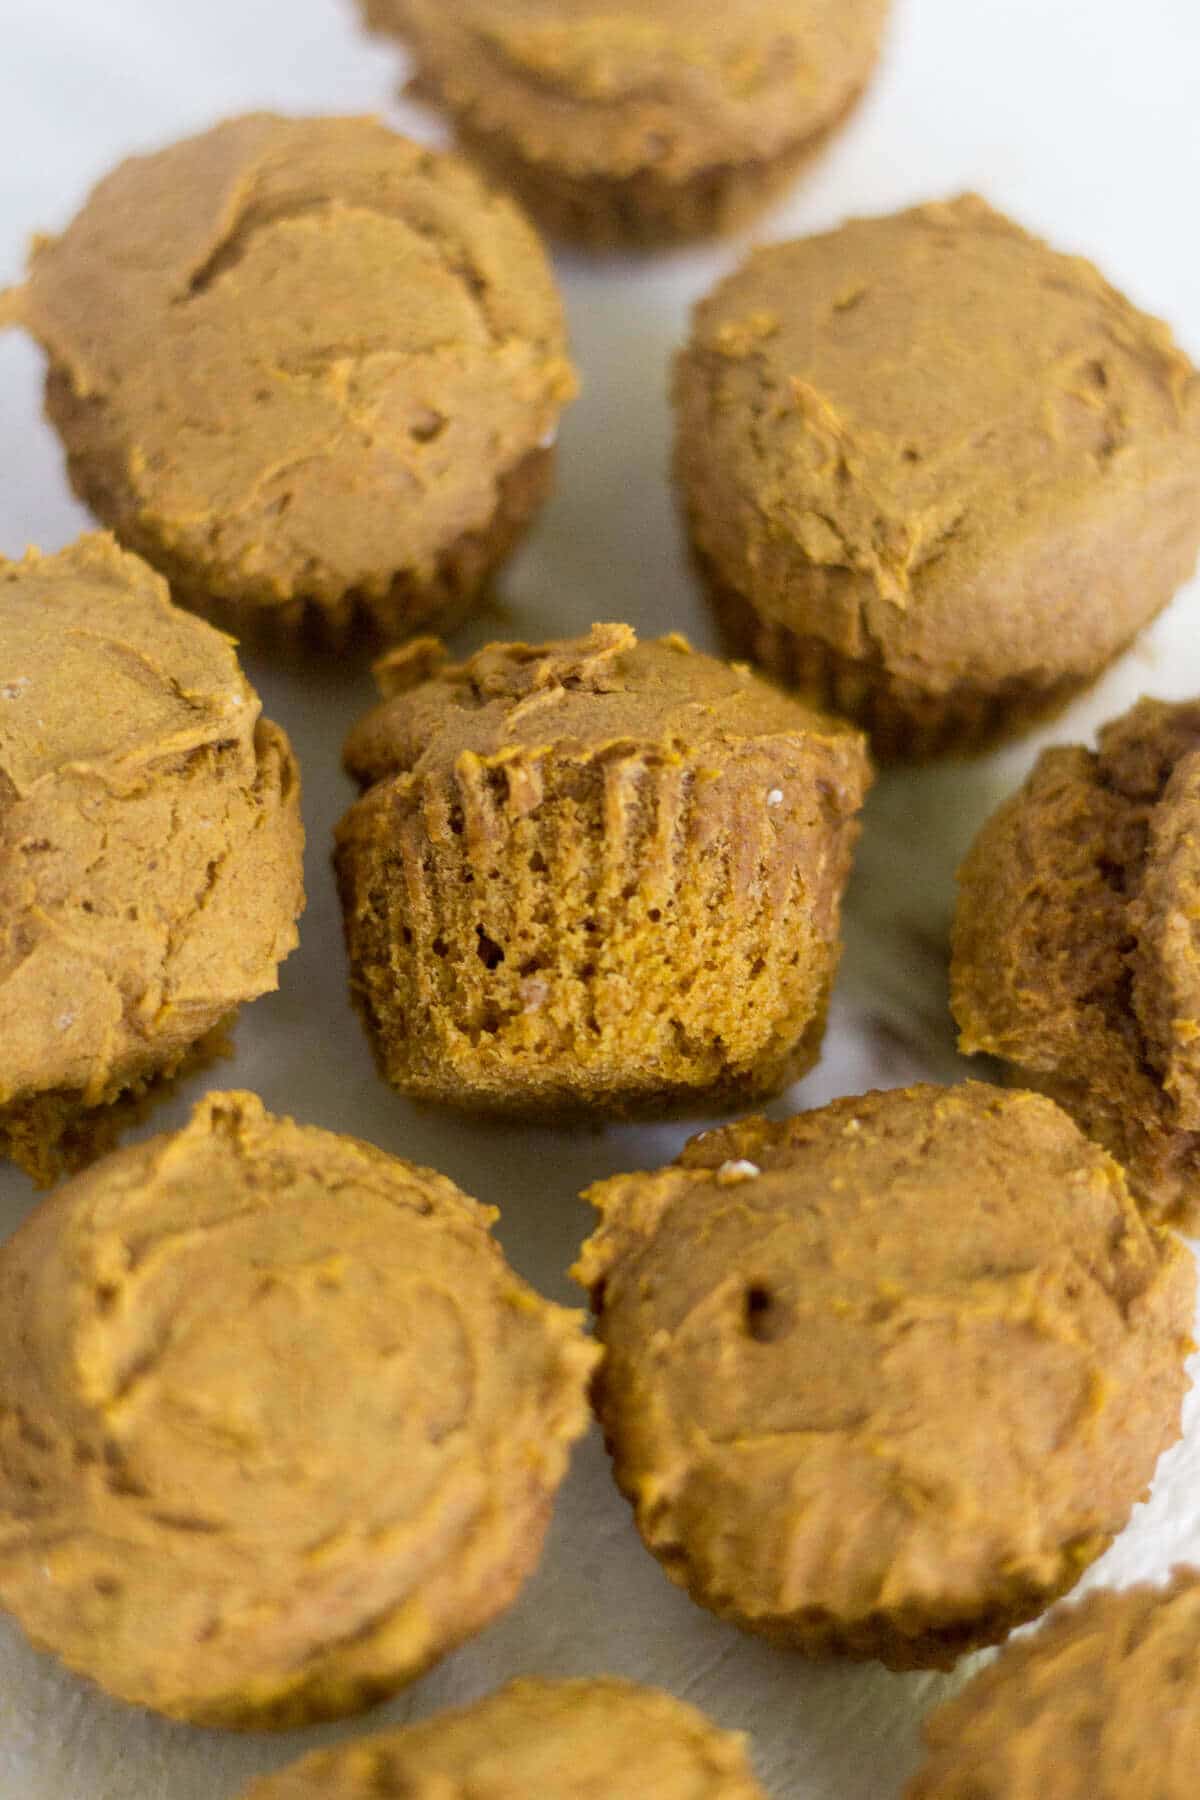 With only two ingredients, these mini pumpkin muffins are as easy as they come. Plus they're only 45 calories each! They're made without oil and eggs and they're so soft and filled with pumpkin spice flavor.